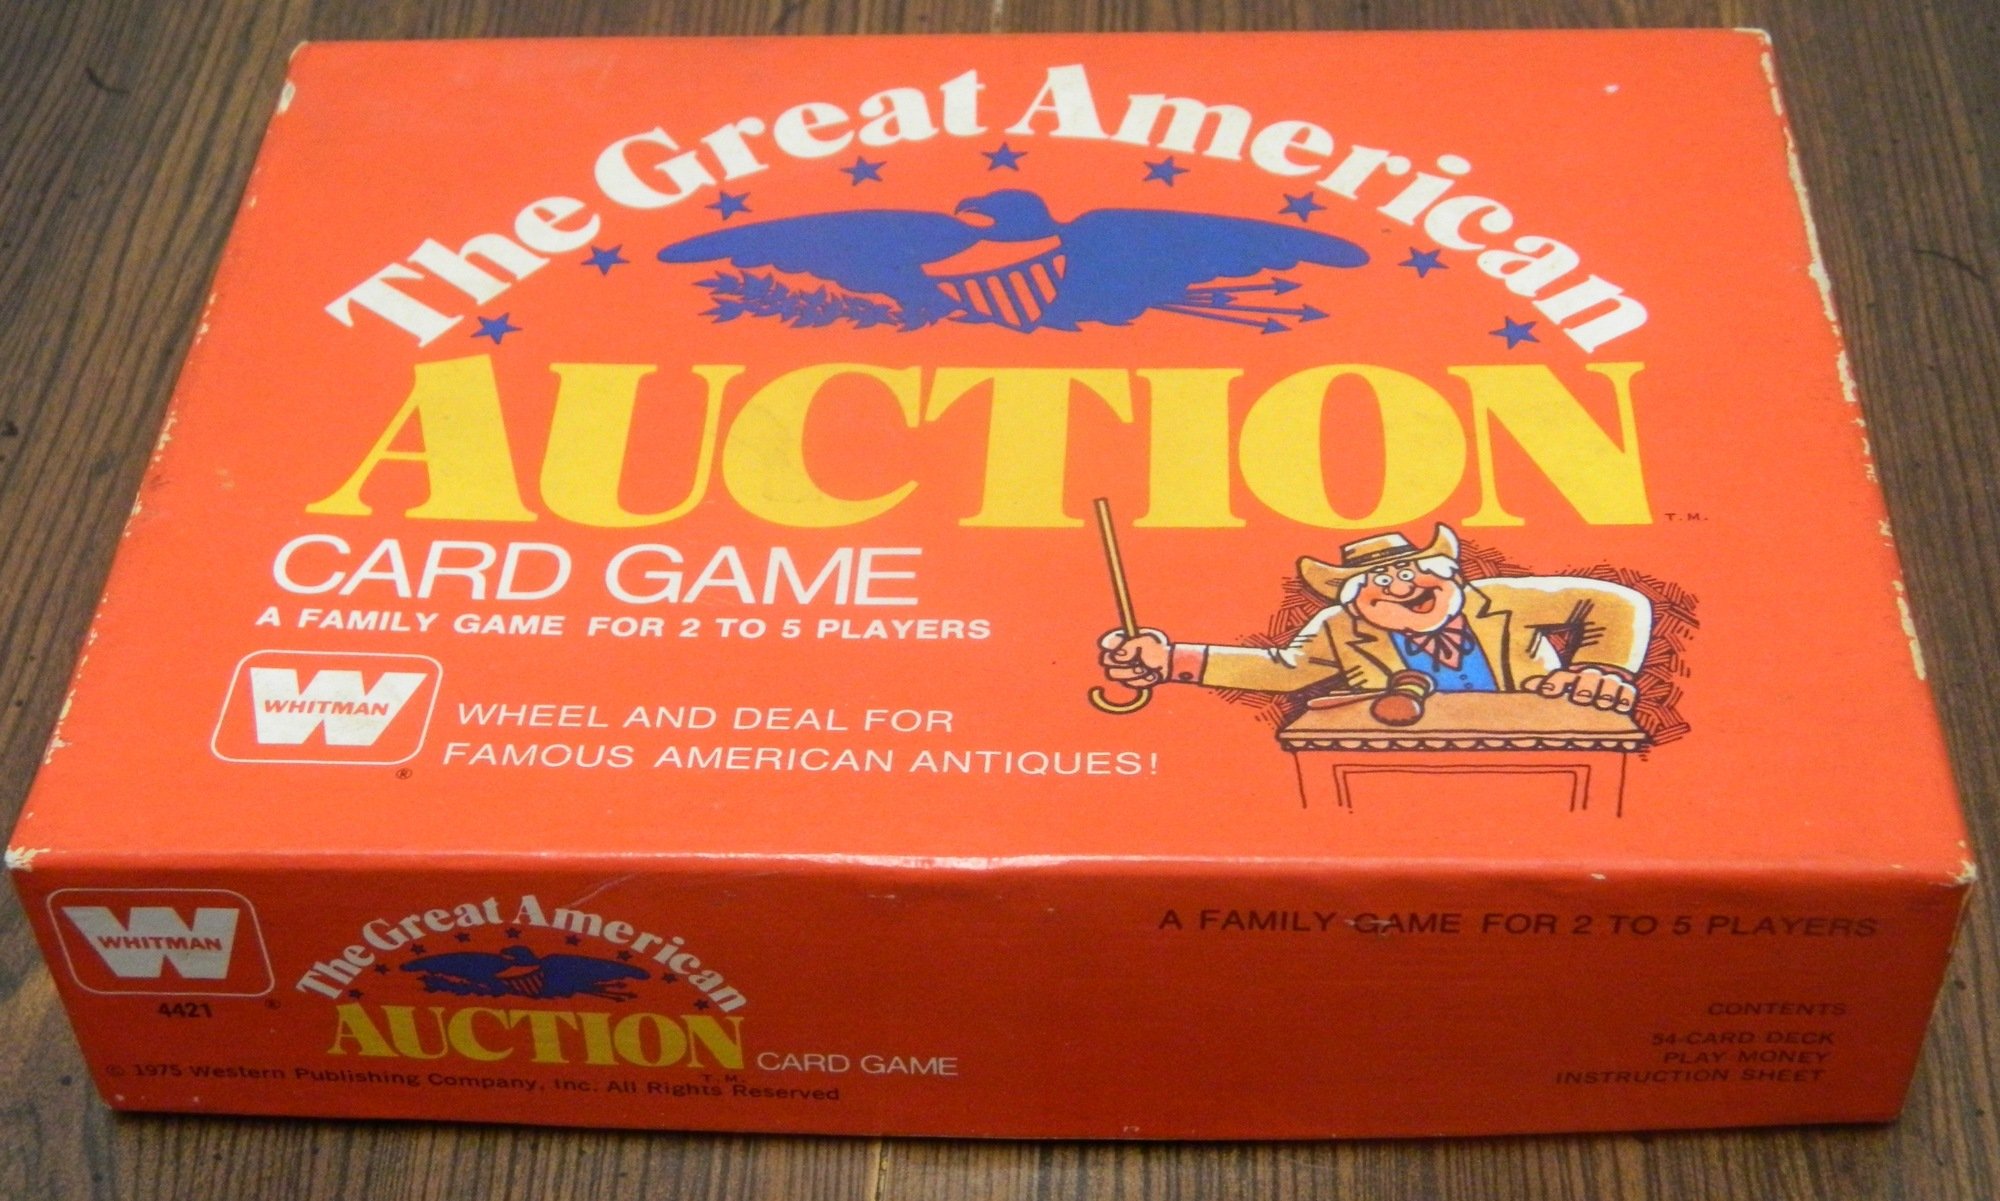 Great American Auction Card Game Box